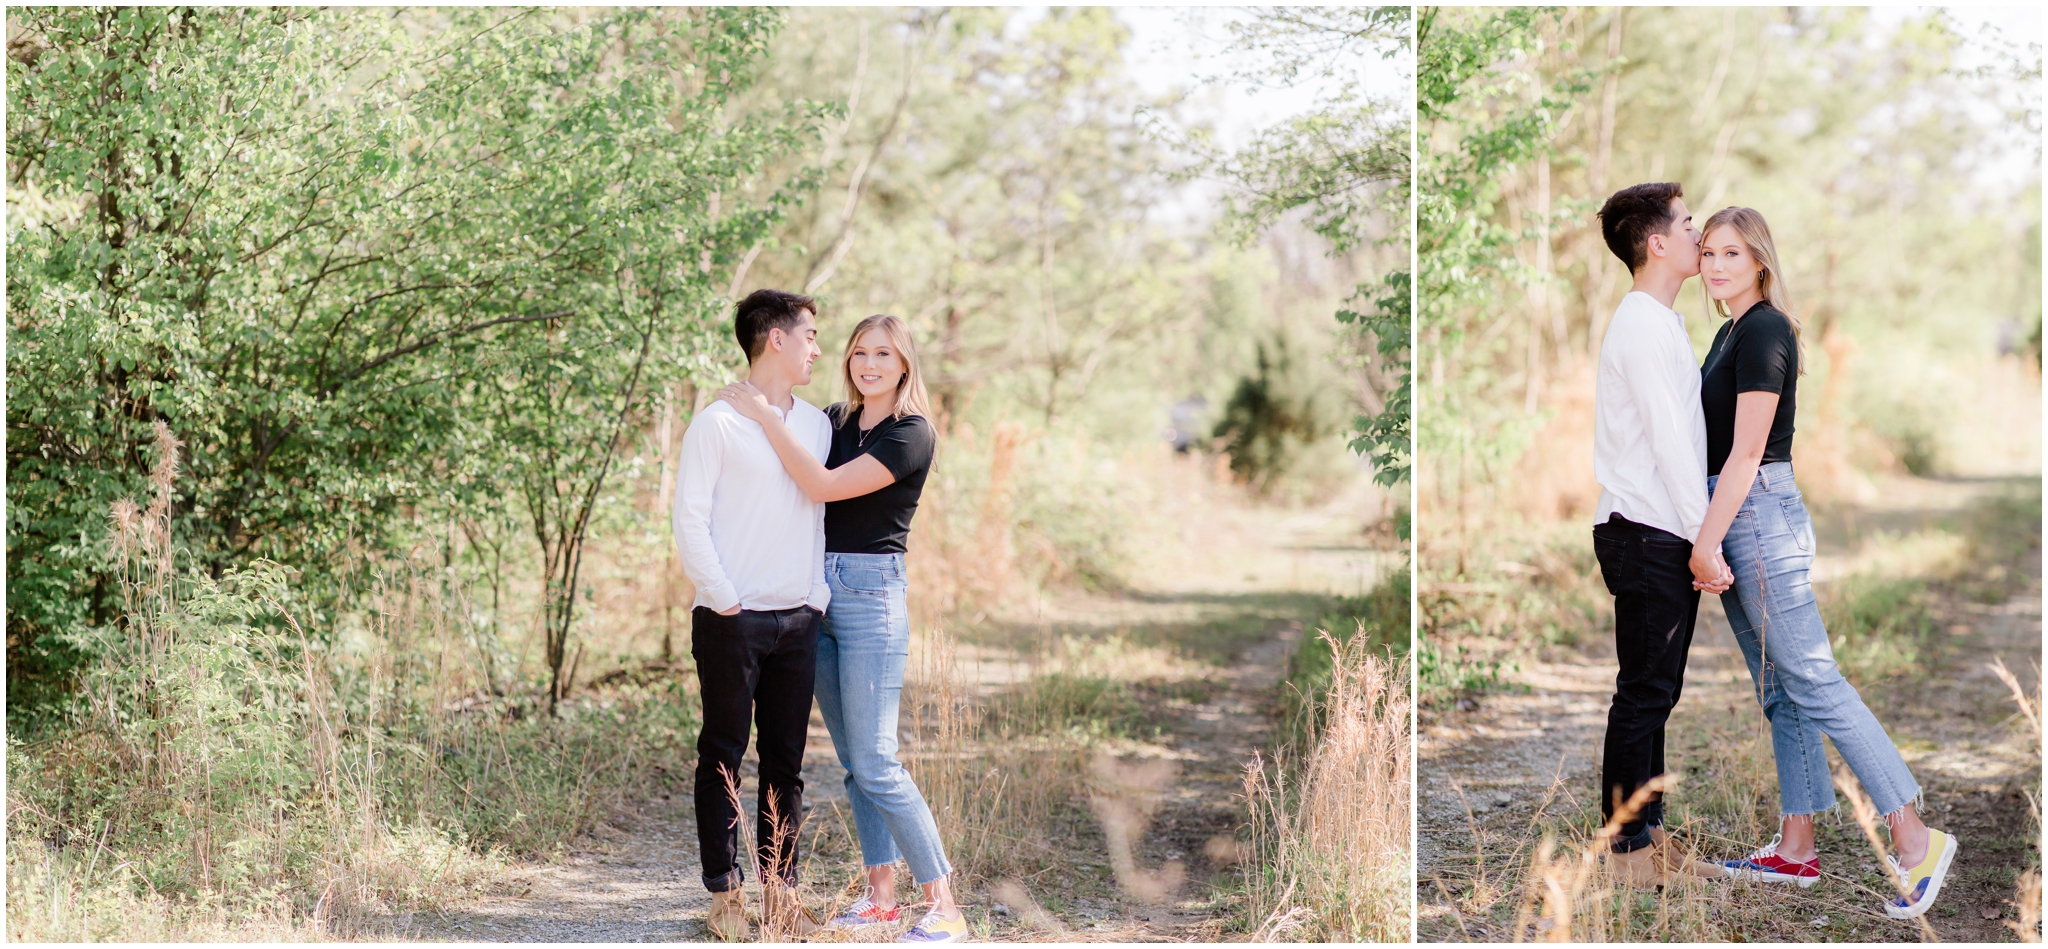 Springtime Engagement Session in Downtown Chattanooga with chattanooga wedding photographer alyssa rachelle photography